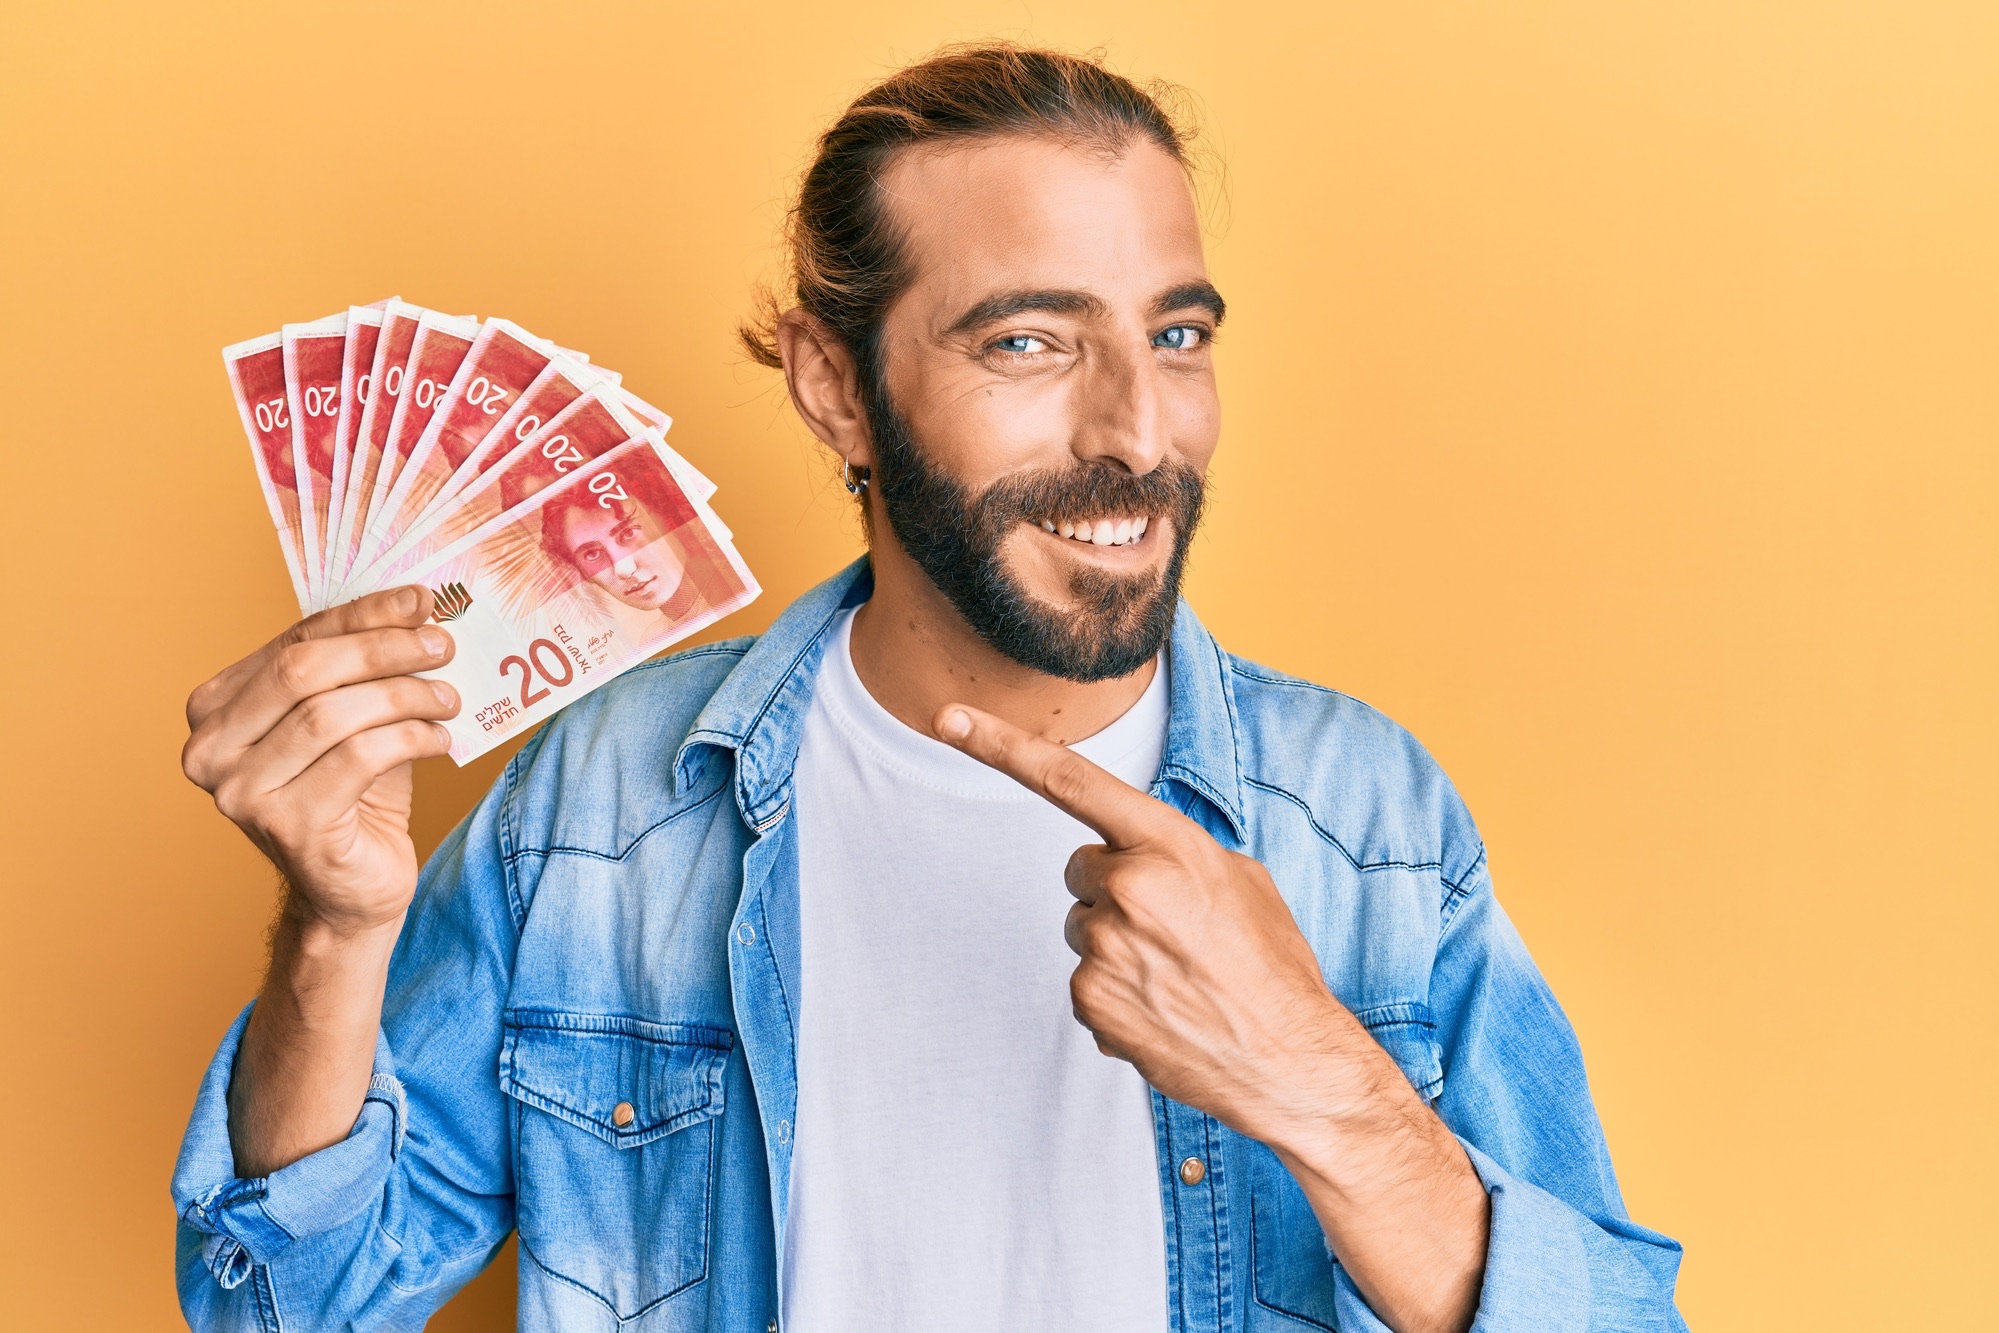 Attractive man with long hair and beard holding 20 israel shekels banknotes smiling happy pointing with hand and finger